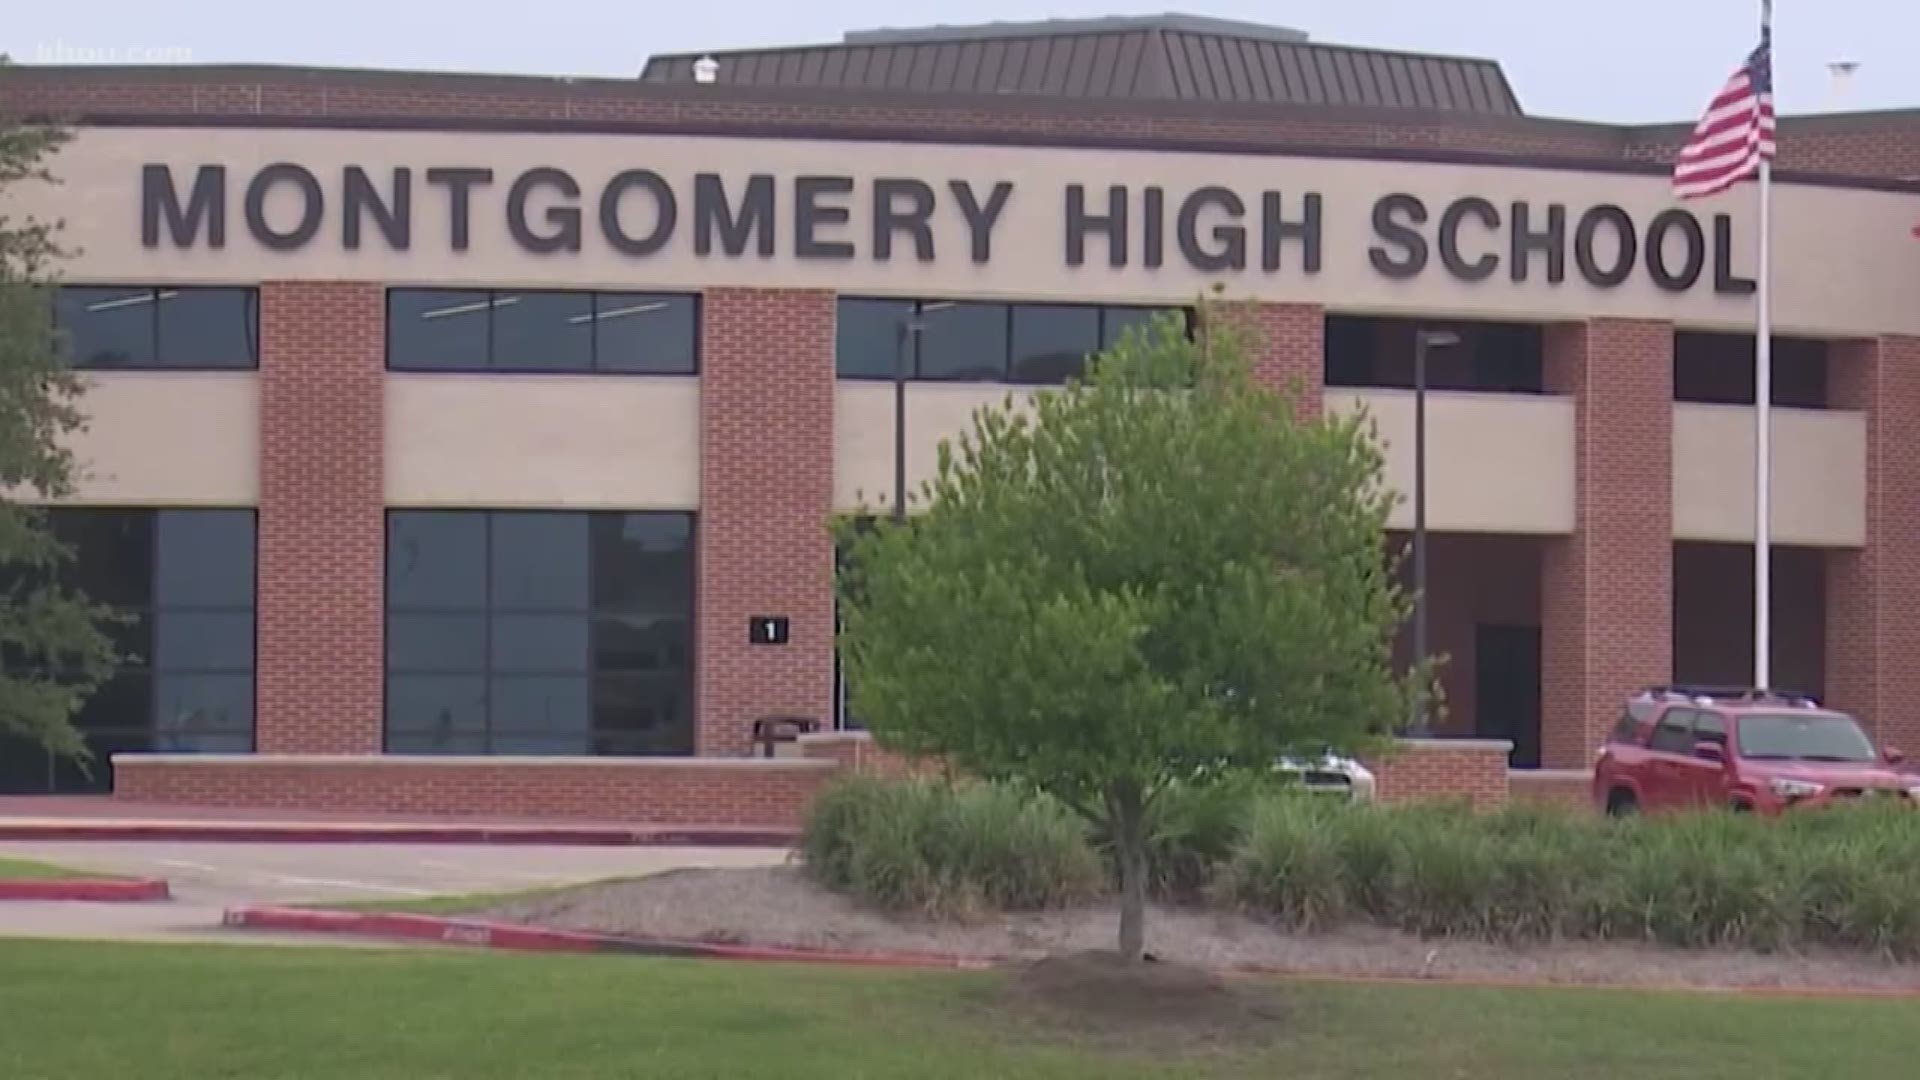 The Montgomery ISD School Board held a closed-meeting to discuss the ongoing alleged hazing investigation involving Montgomery High School’s football team.